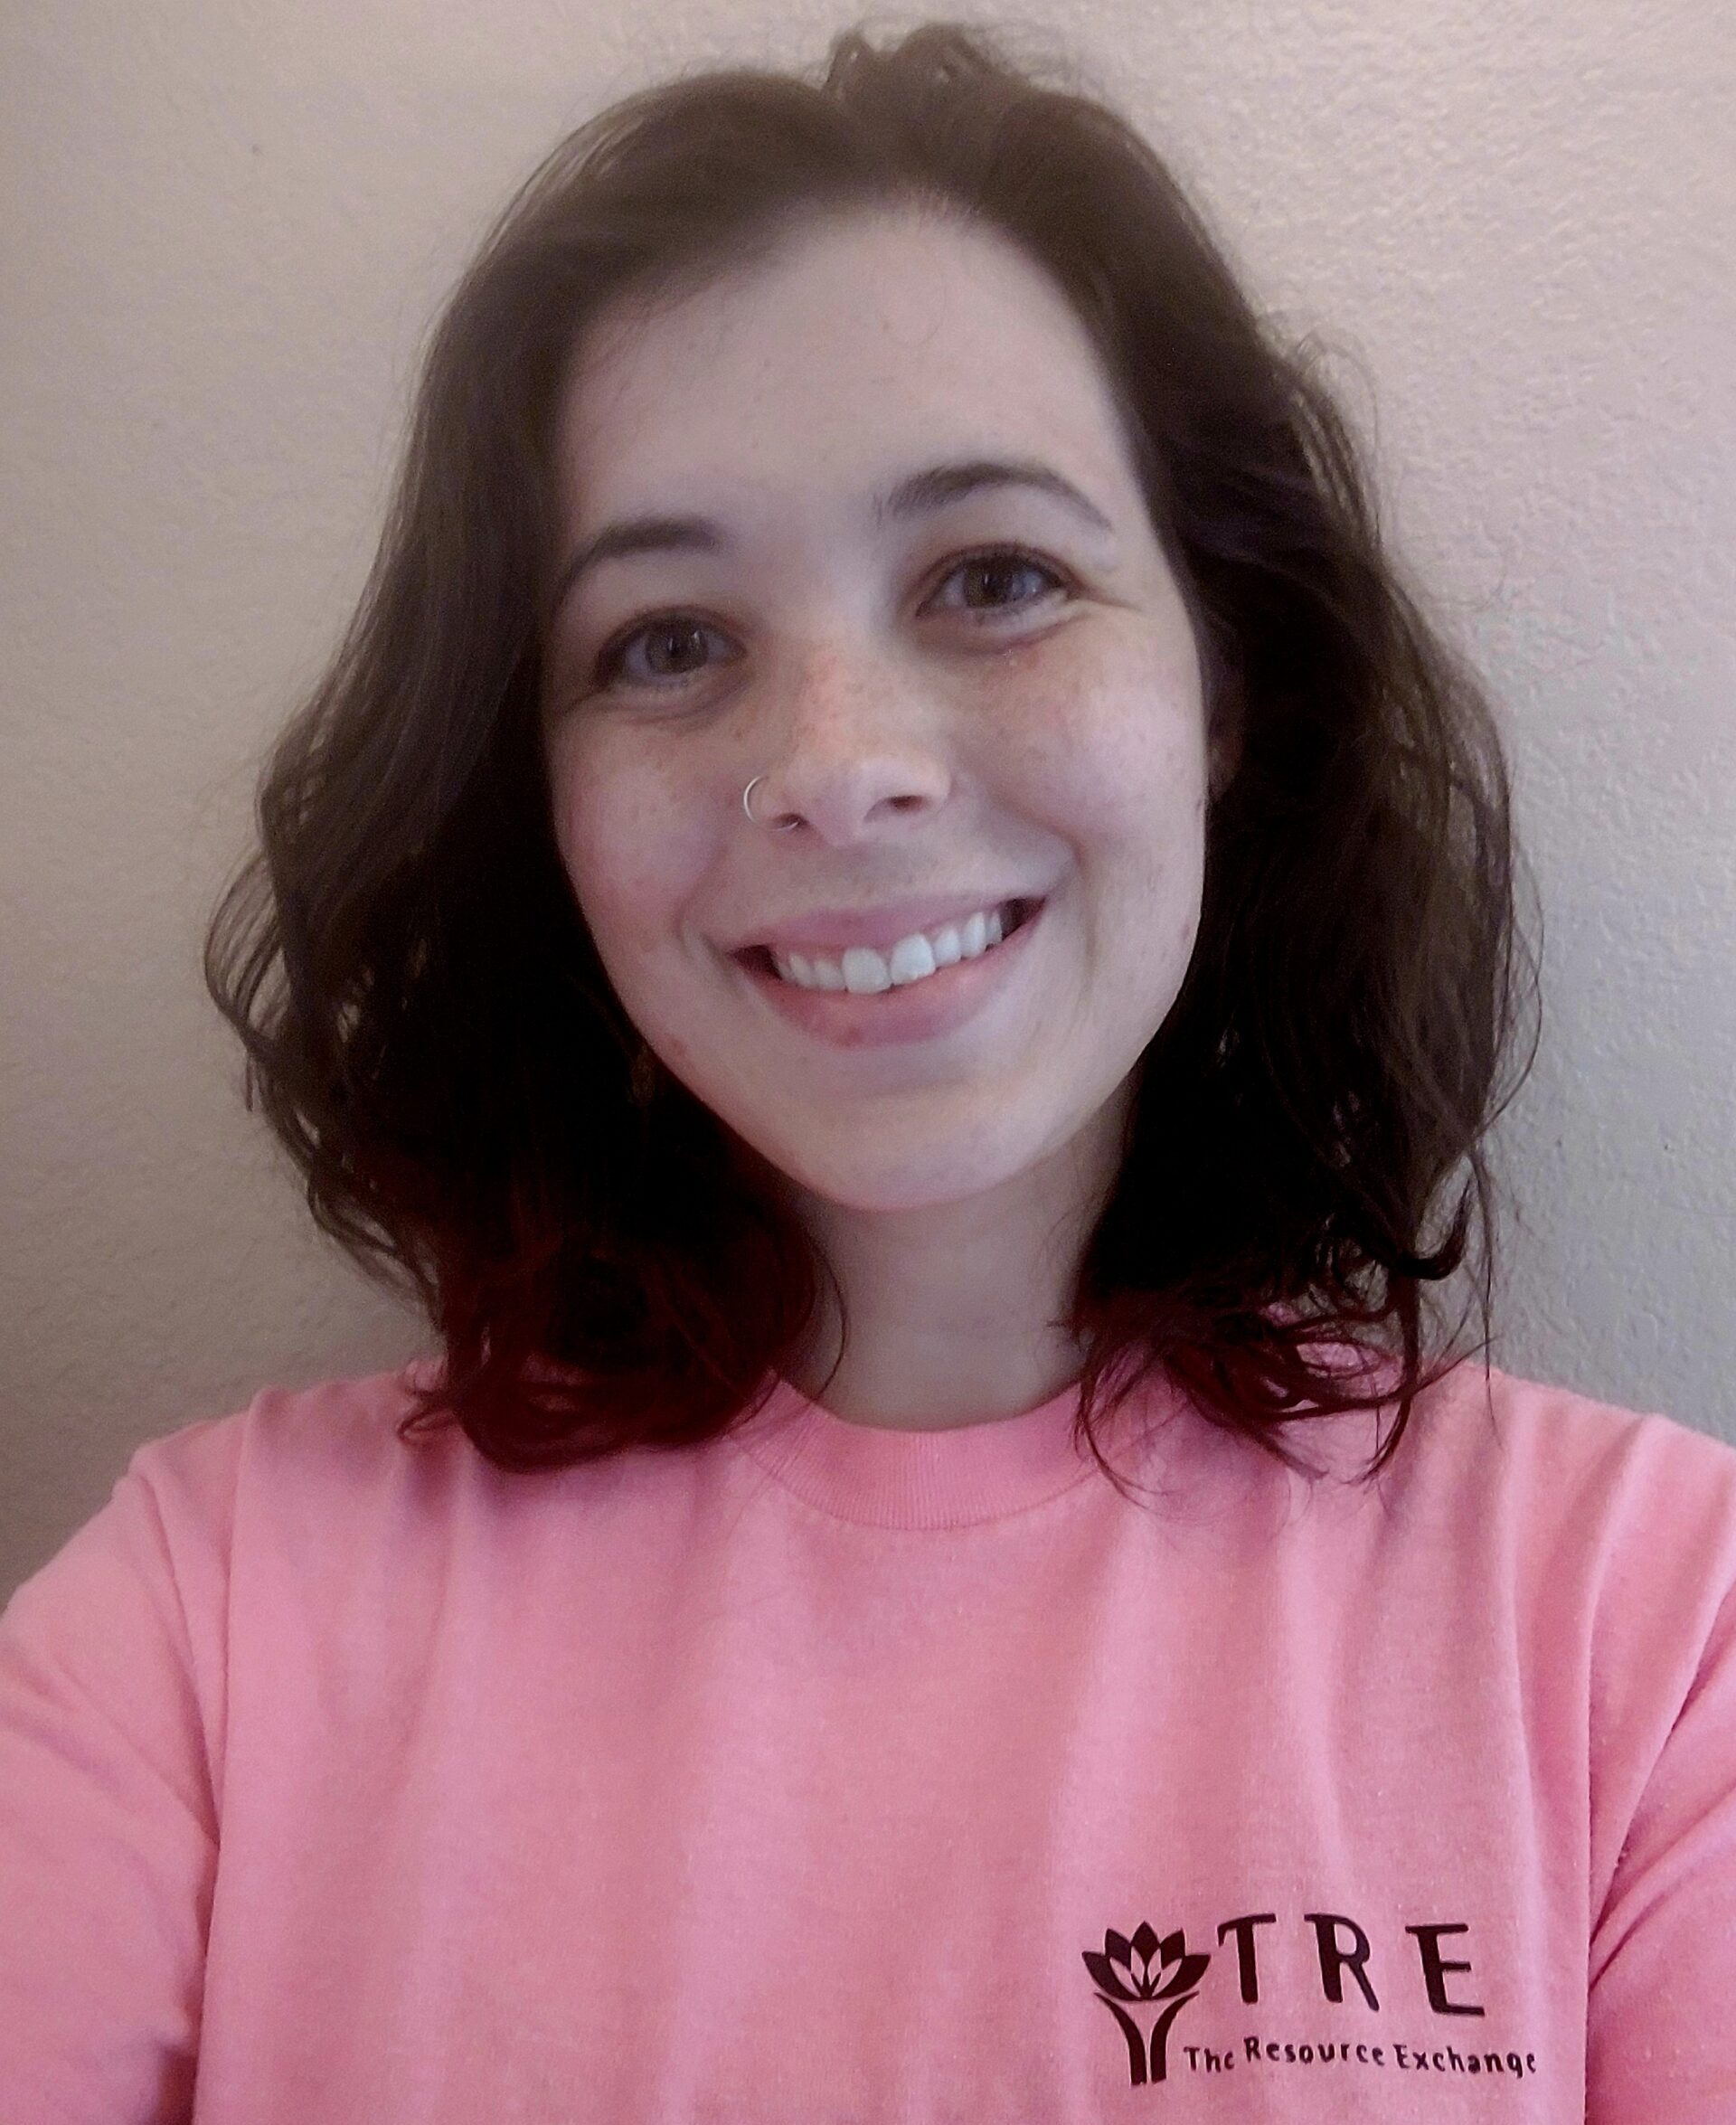 woman with brown hair wearing pink shirt smiles at viewer